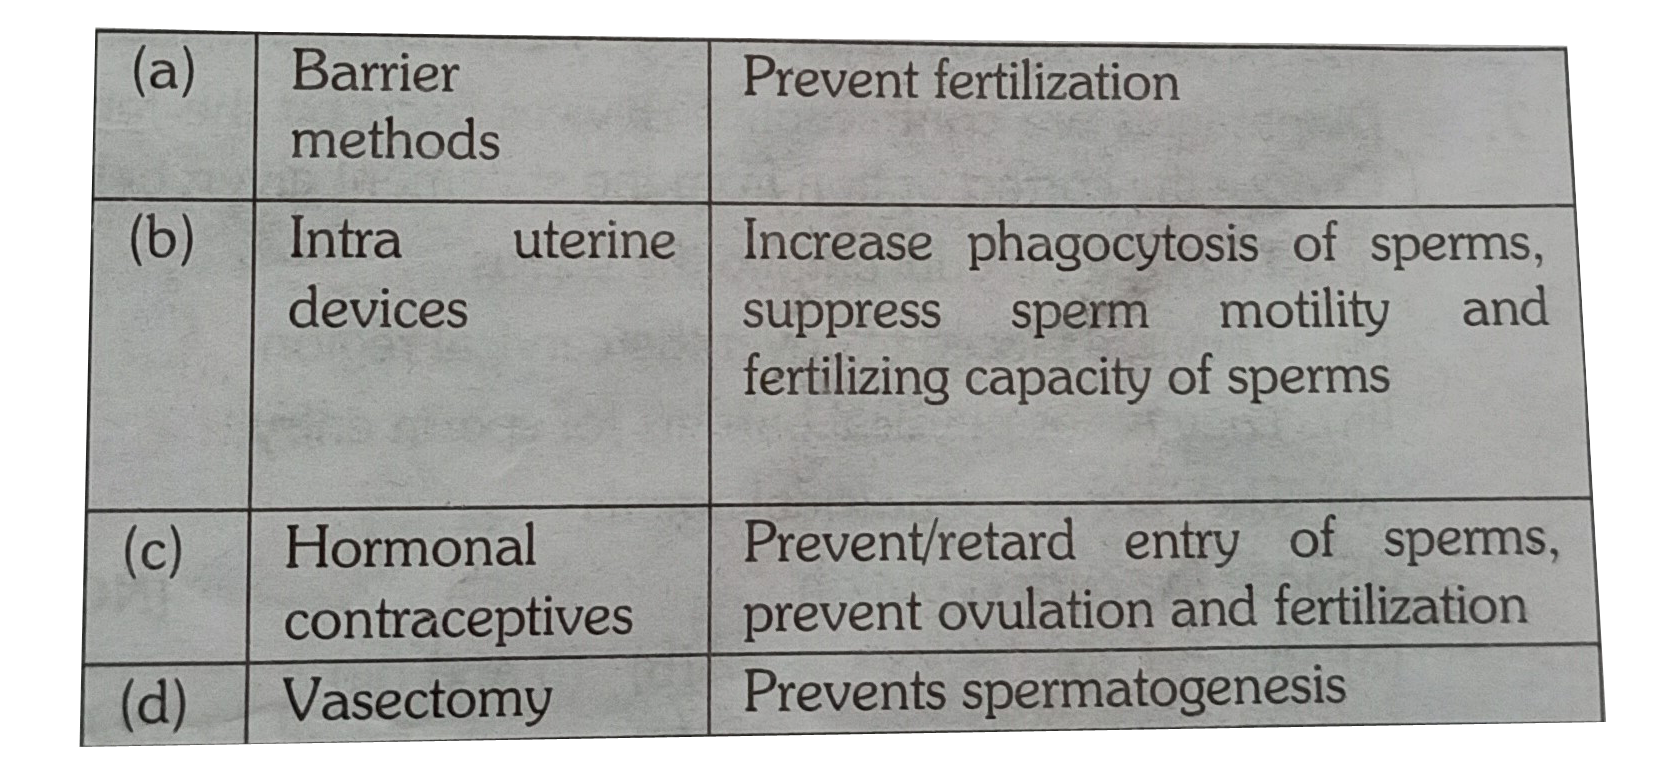 Which of the following approches does not give the defined action of contraceptive